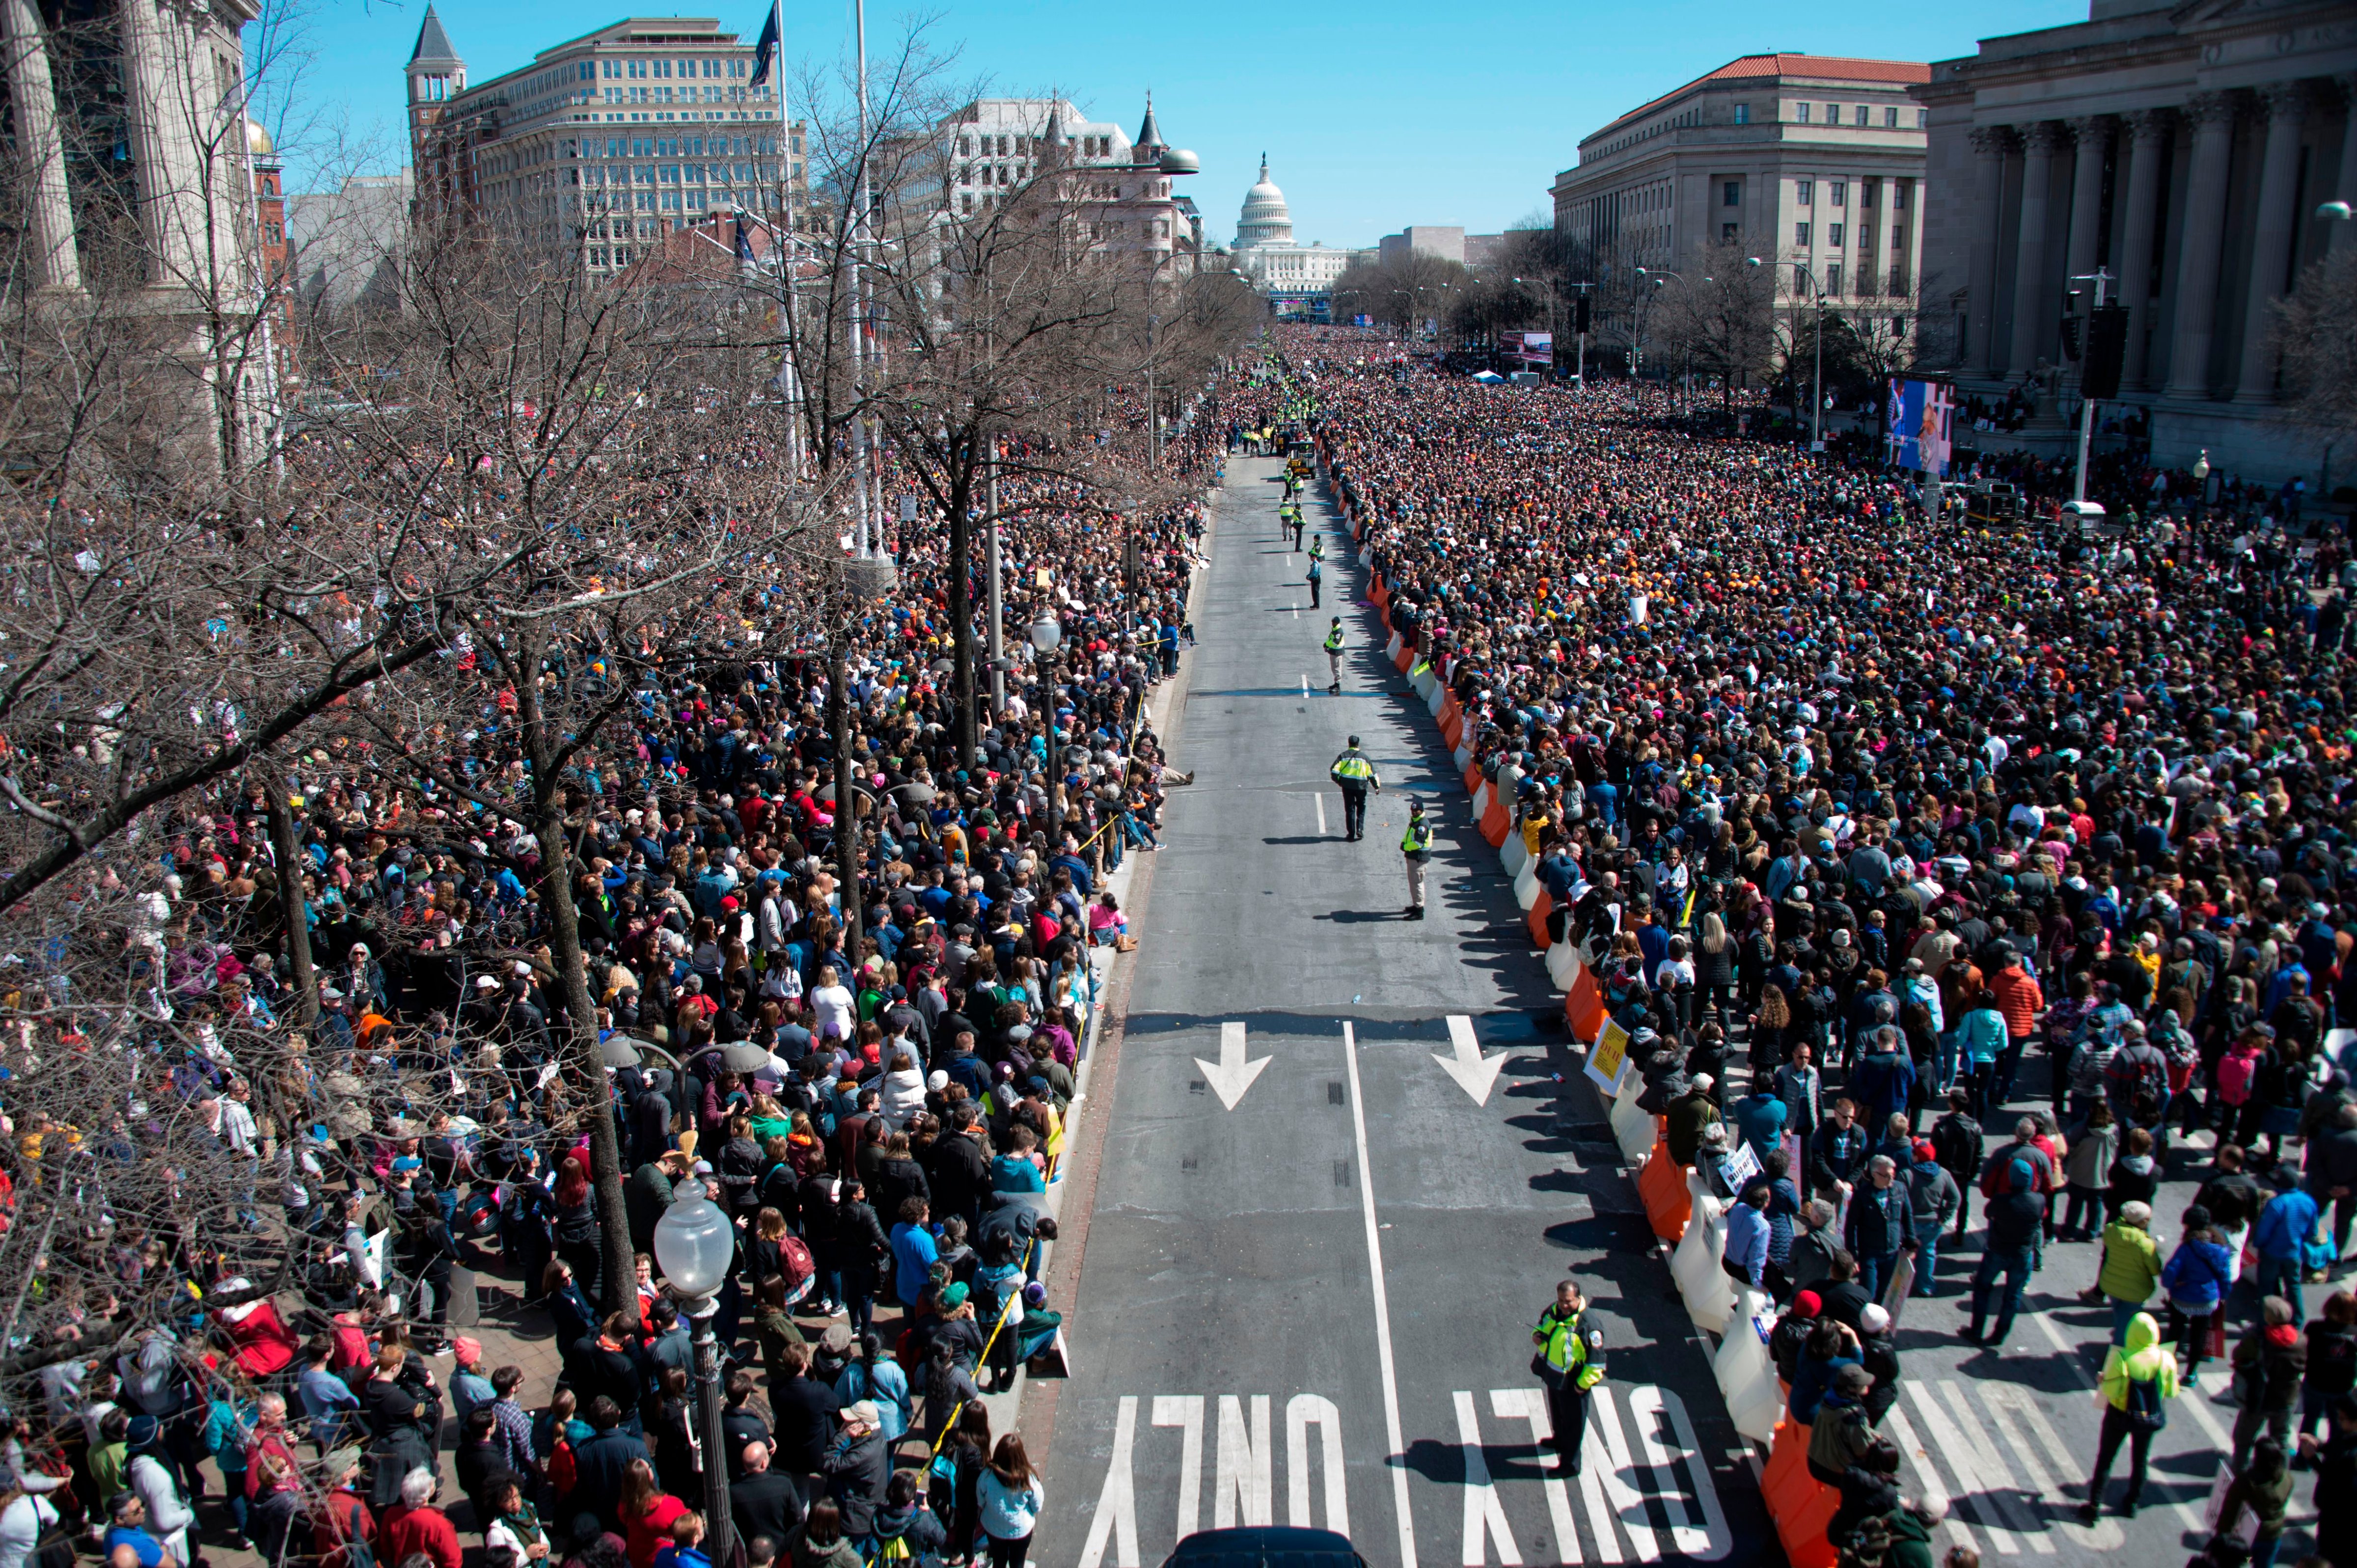 People take part in the March For Our Lives rally against gun violence in Washington, DC on March 24, 2018. Galvanized by a massacre at a Florida high school, hundreds of thousands of Americans are expected to take to the streets in cities across the United States on Saturday in the biggest protest for gun control in a generation. (Andrew Caballero-Reynolds AFP/Getty Images)